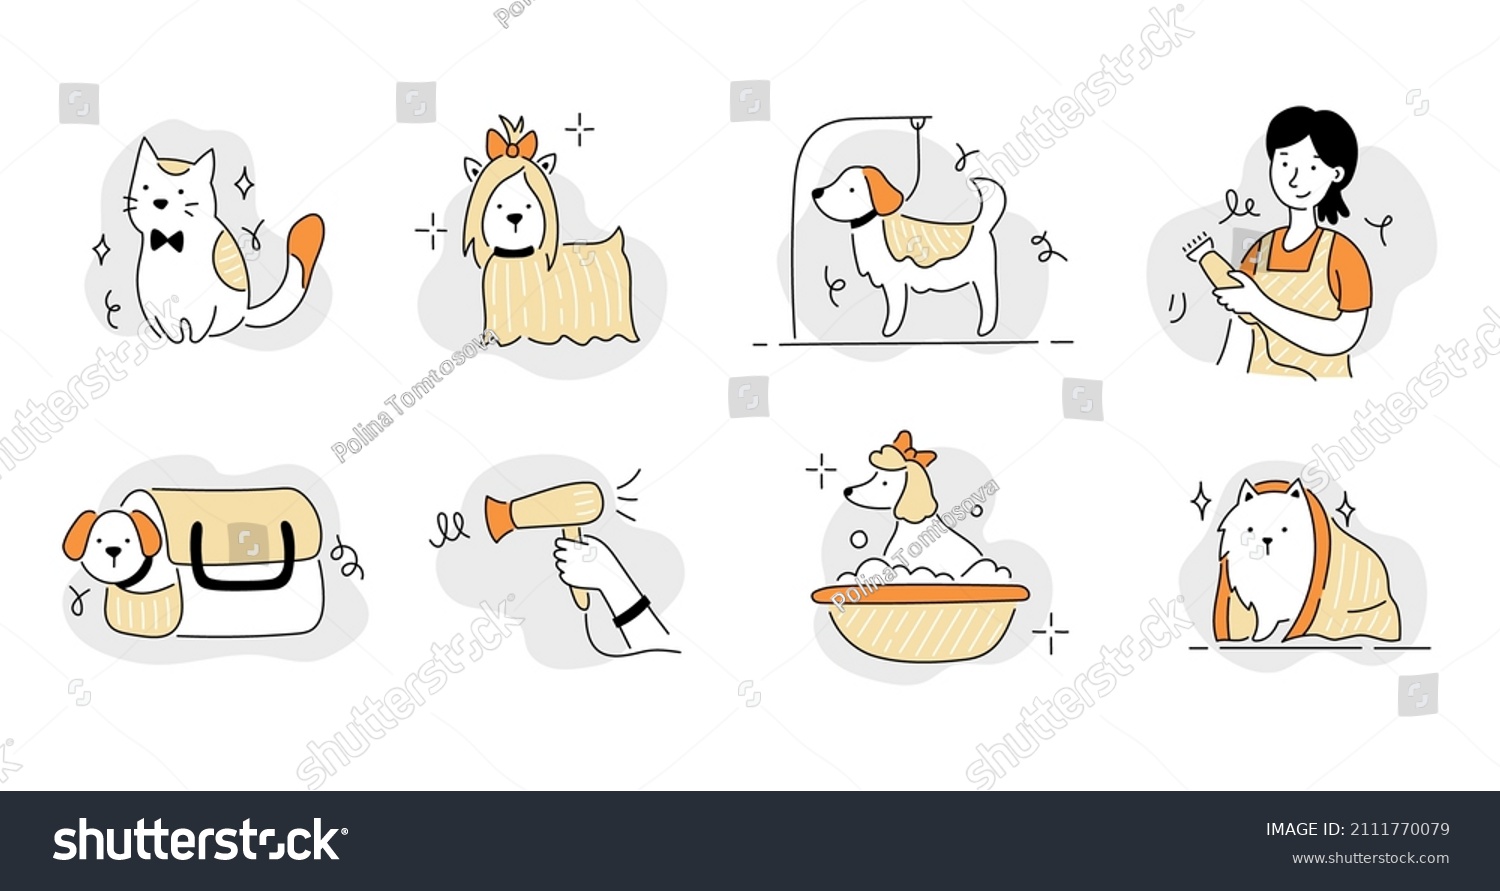 SVG of Pet grooming salon icon set. Cute dog beauty grooming salon, wash, care hair of pet. Doodle line style animal and character. Vector illustration. svg